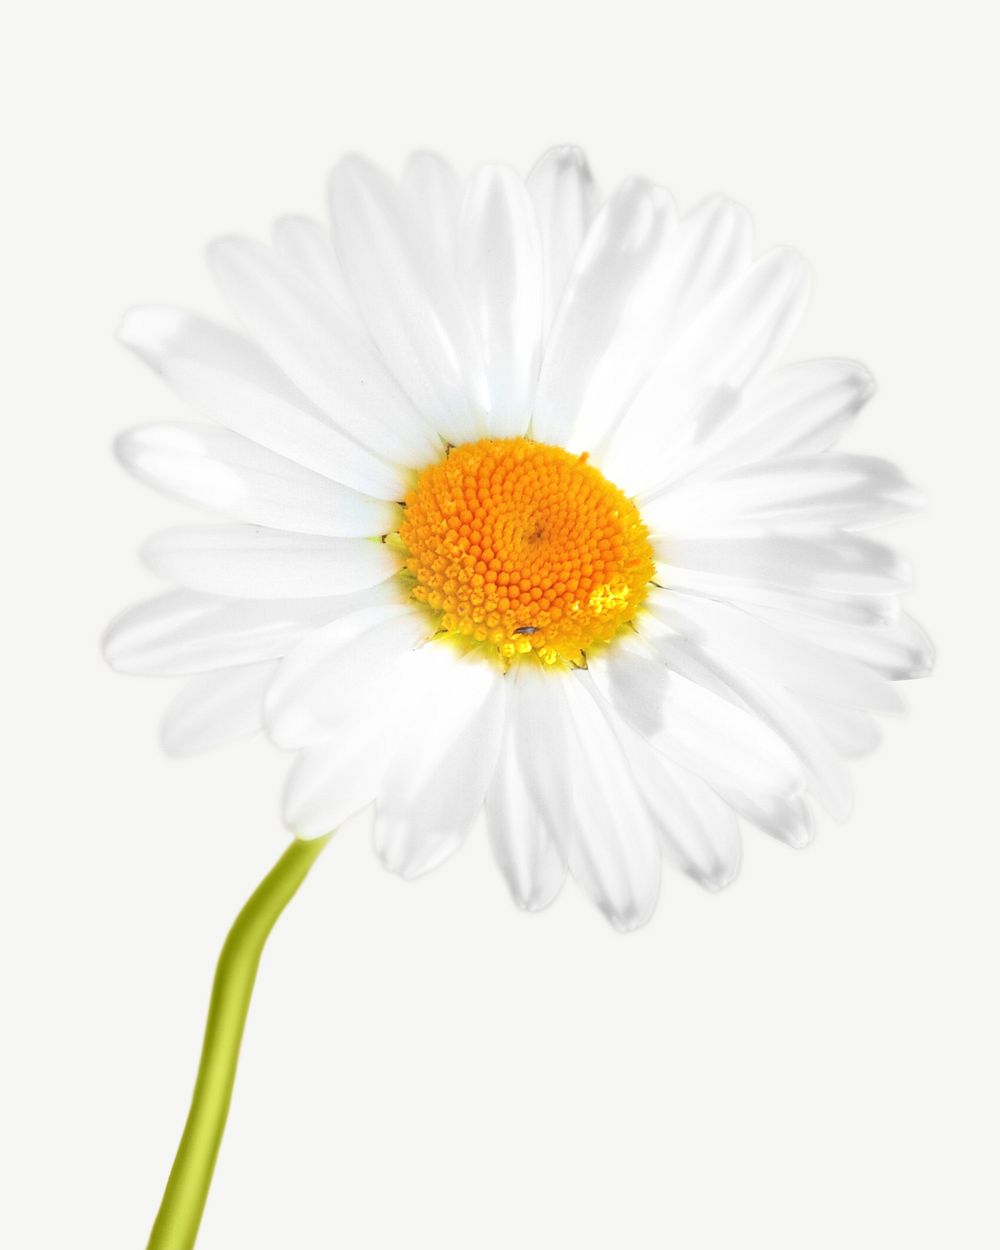 Daisy flower collage element psd